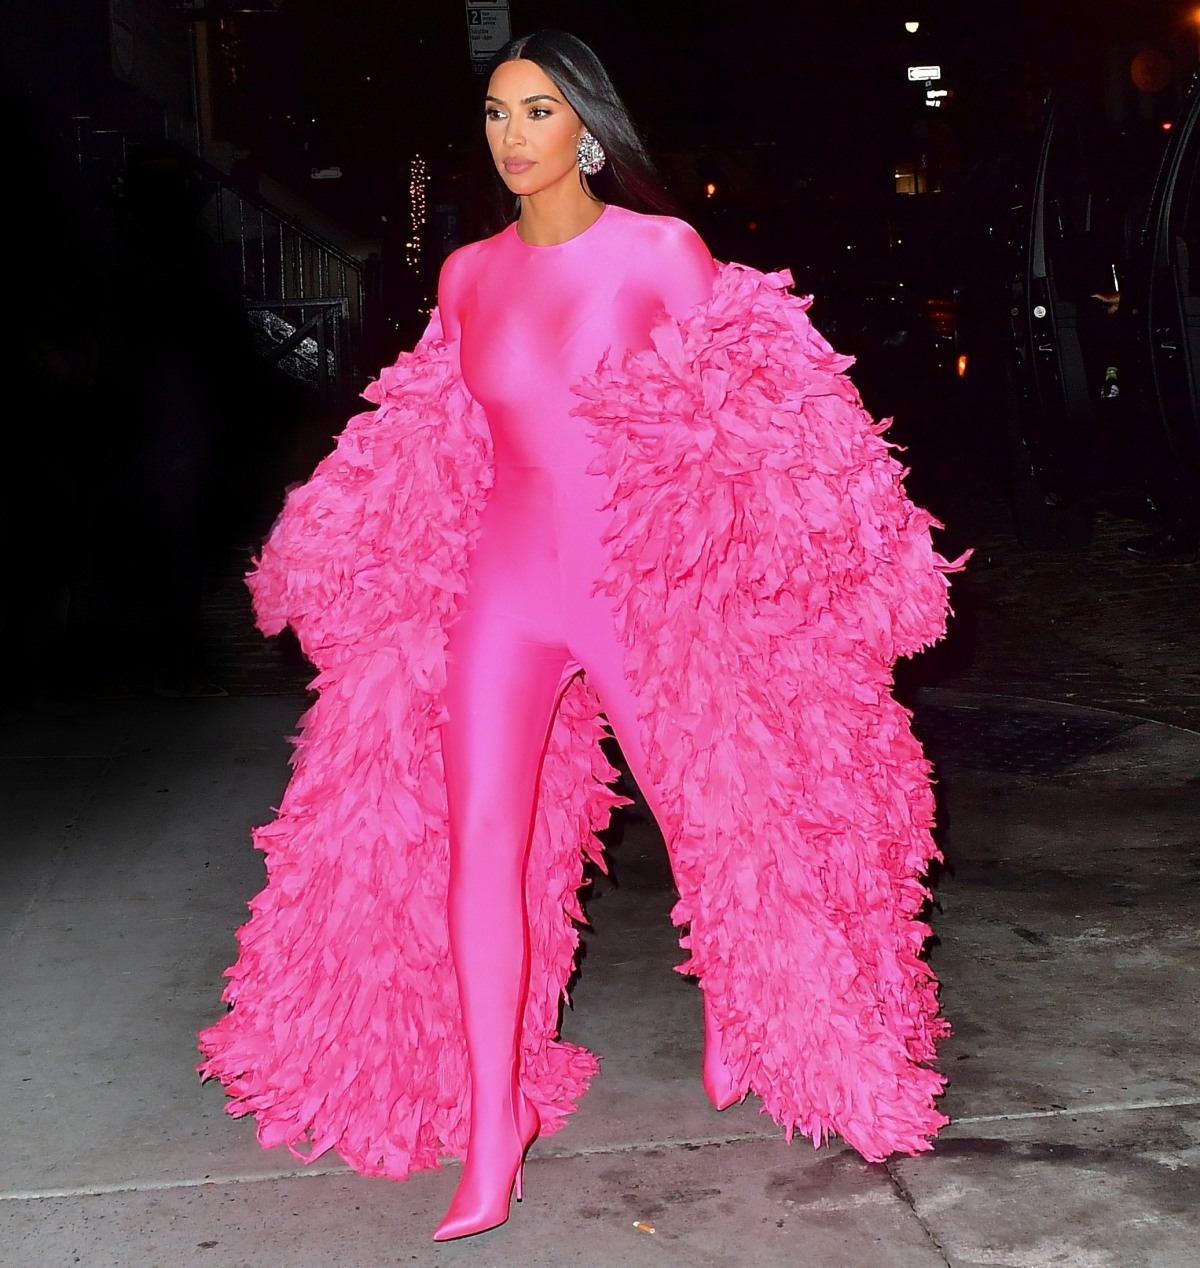 Kim Kardashian looks pretty in pink outside the SNL afterparty in NYC!